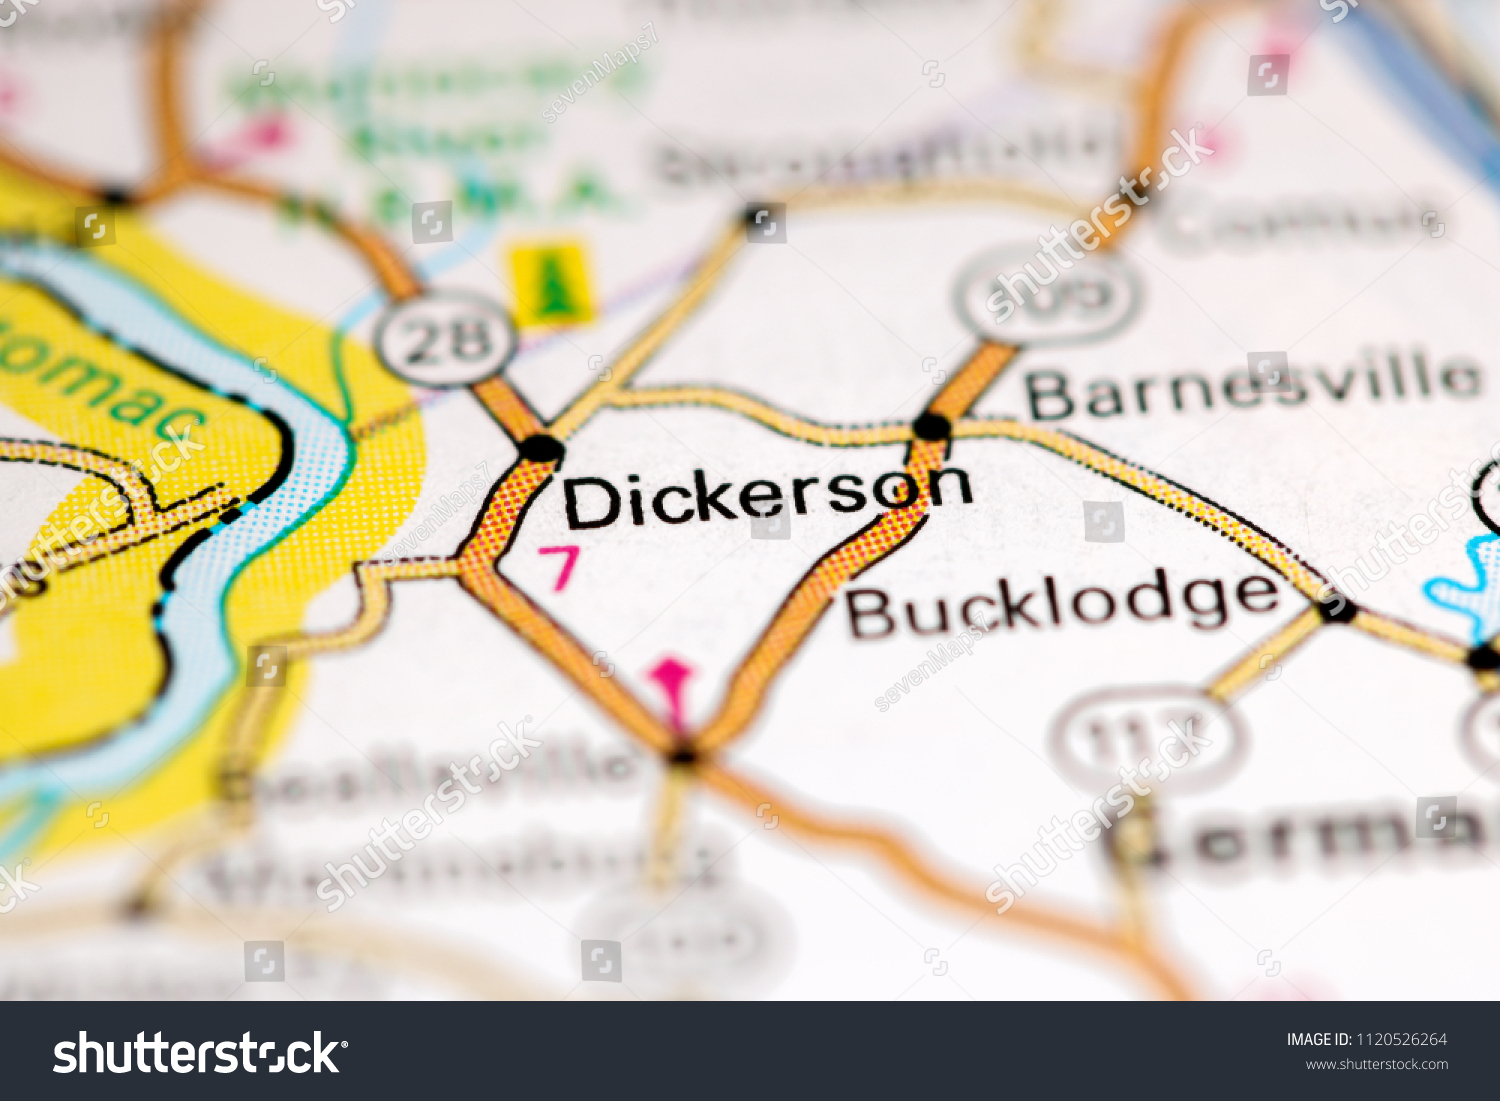 City Logo for Dickerson